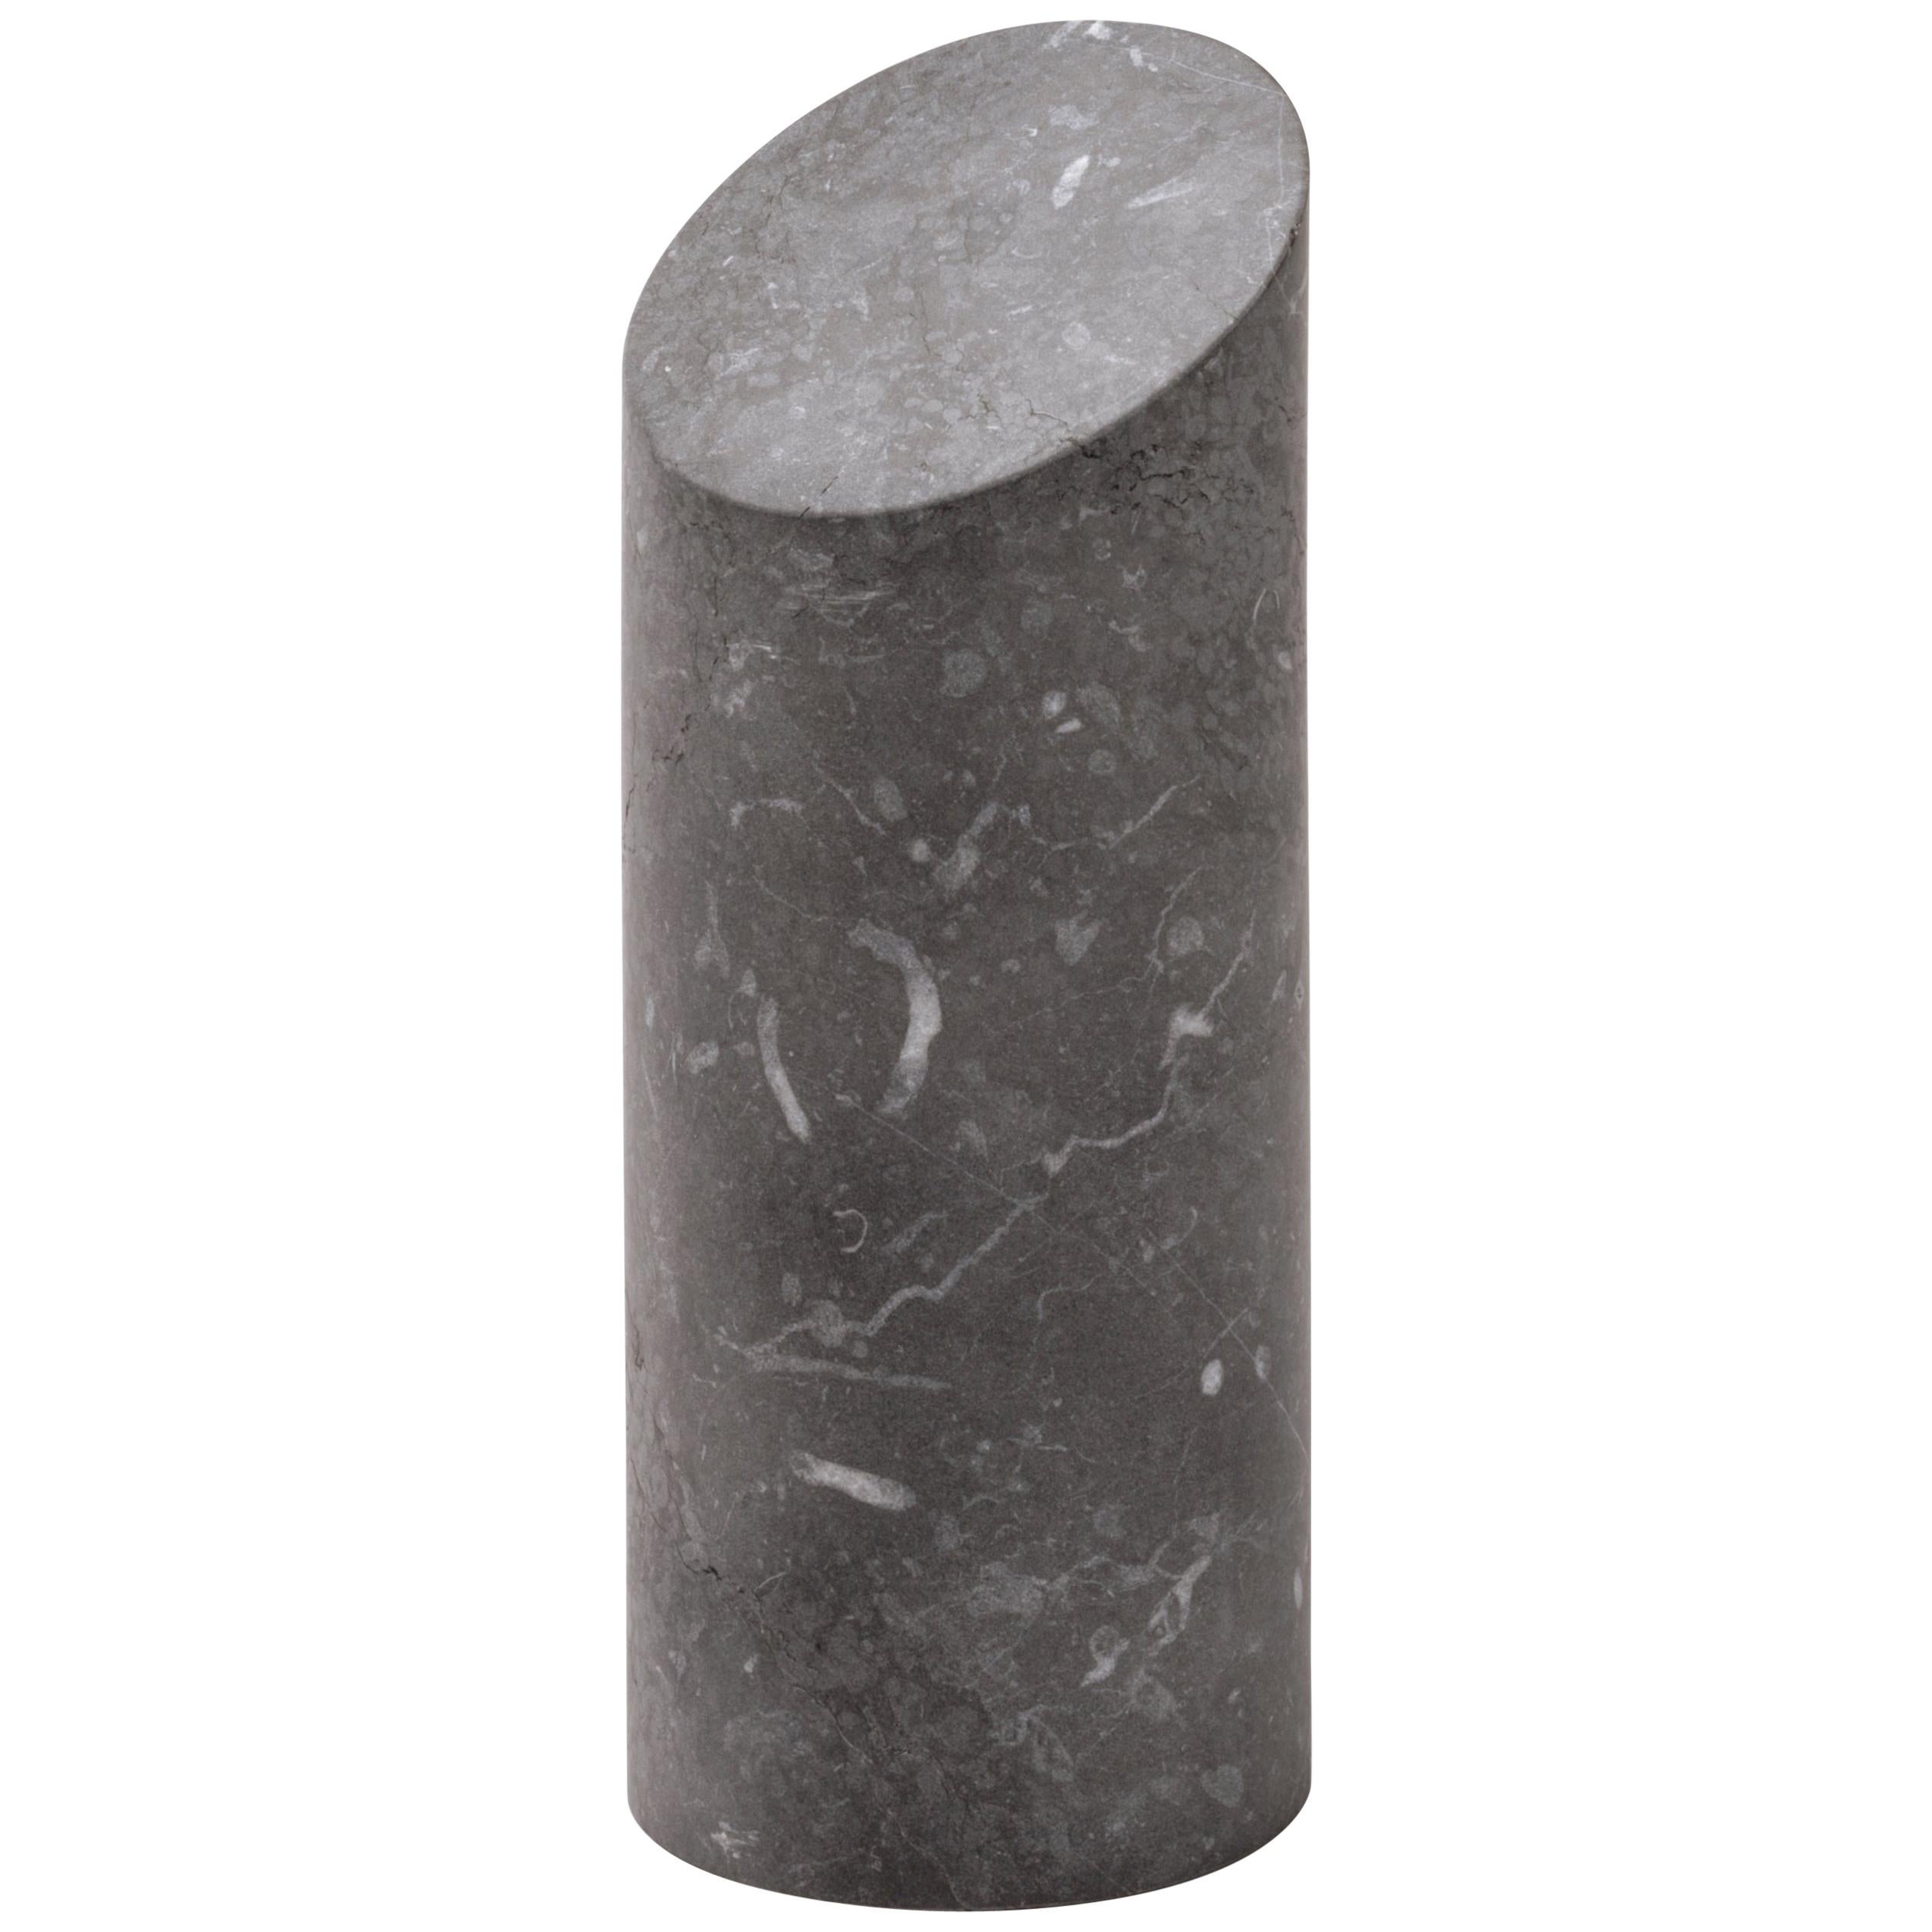 Salvatori Kilos Cylinder Paperweight in Nero Marquina Marble by Elisa Ossino For Sale